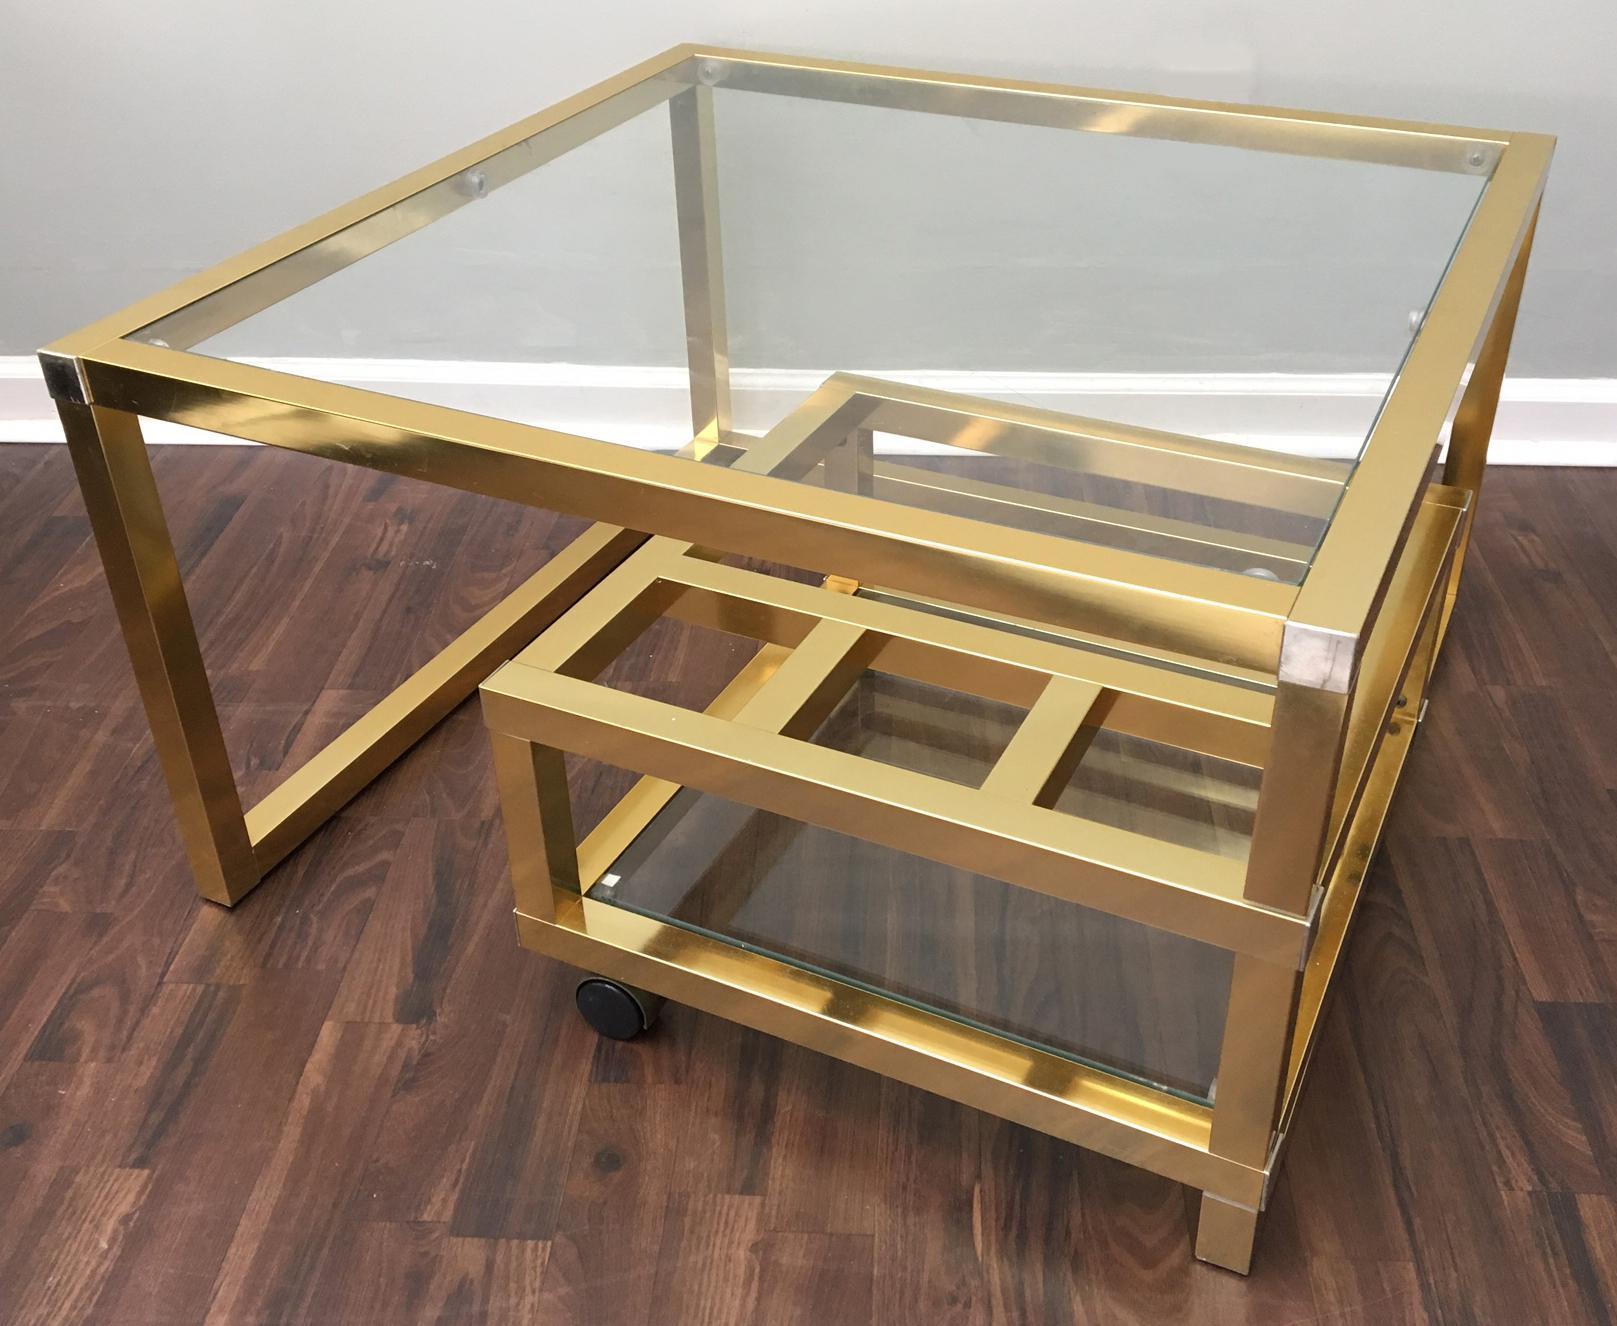 Mid-Century Modern brass coffee table inspired by Paul Evans, MIlo Baughman, and Maison Jansen.
Brass and chrome modernist coffee table features swing-out section with wine rack and glass shelf. 
Good vintage condition with minor wear consistent